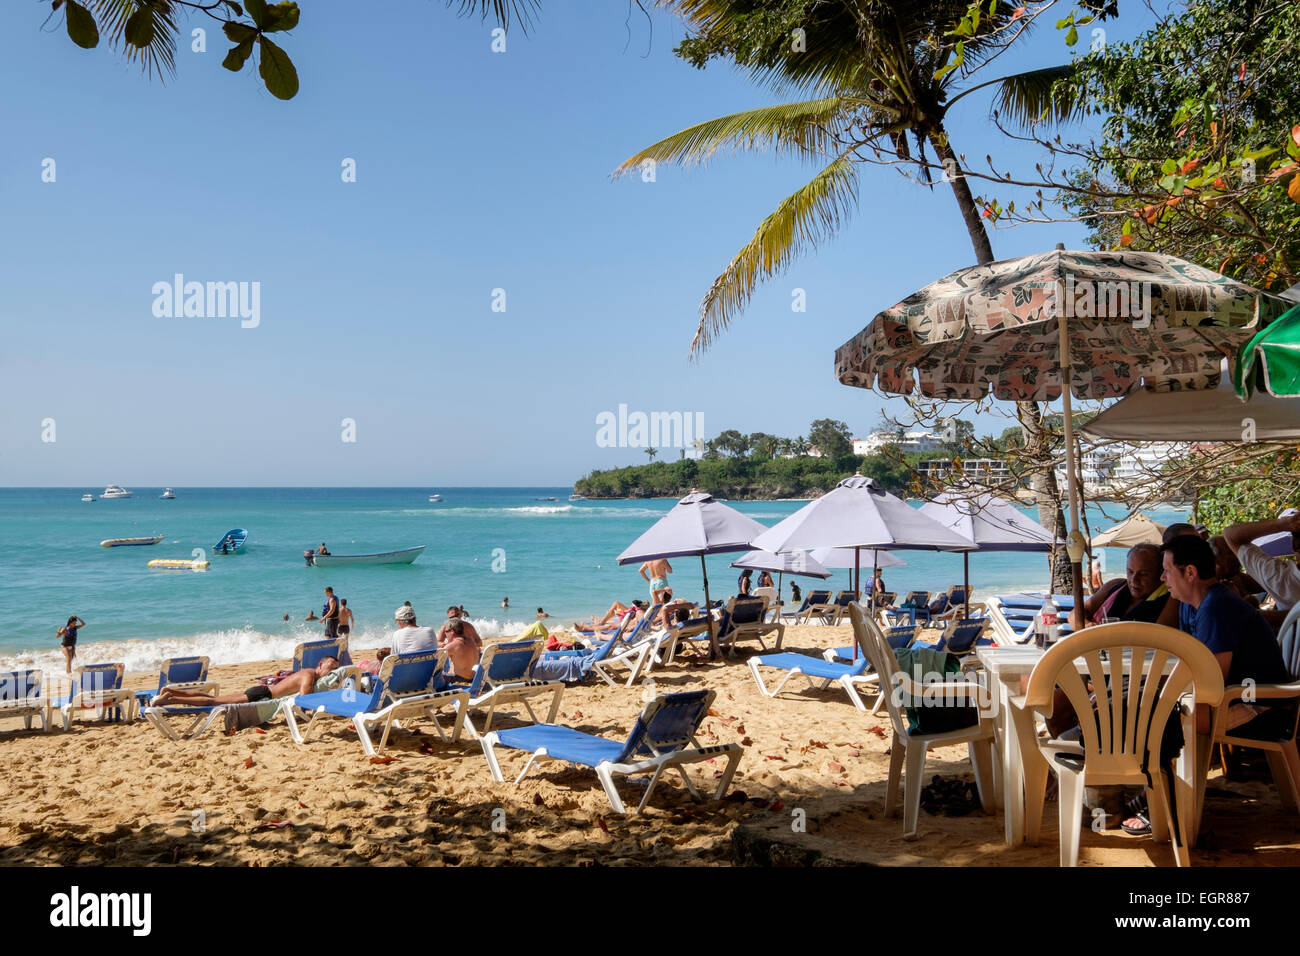 Beach bar and tourists on sandy beach with sea beyond in holiday resort of Sosua, Puerto Plata, Dominican Republic, Caribbean Stock Photo